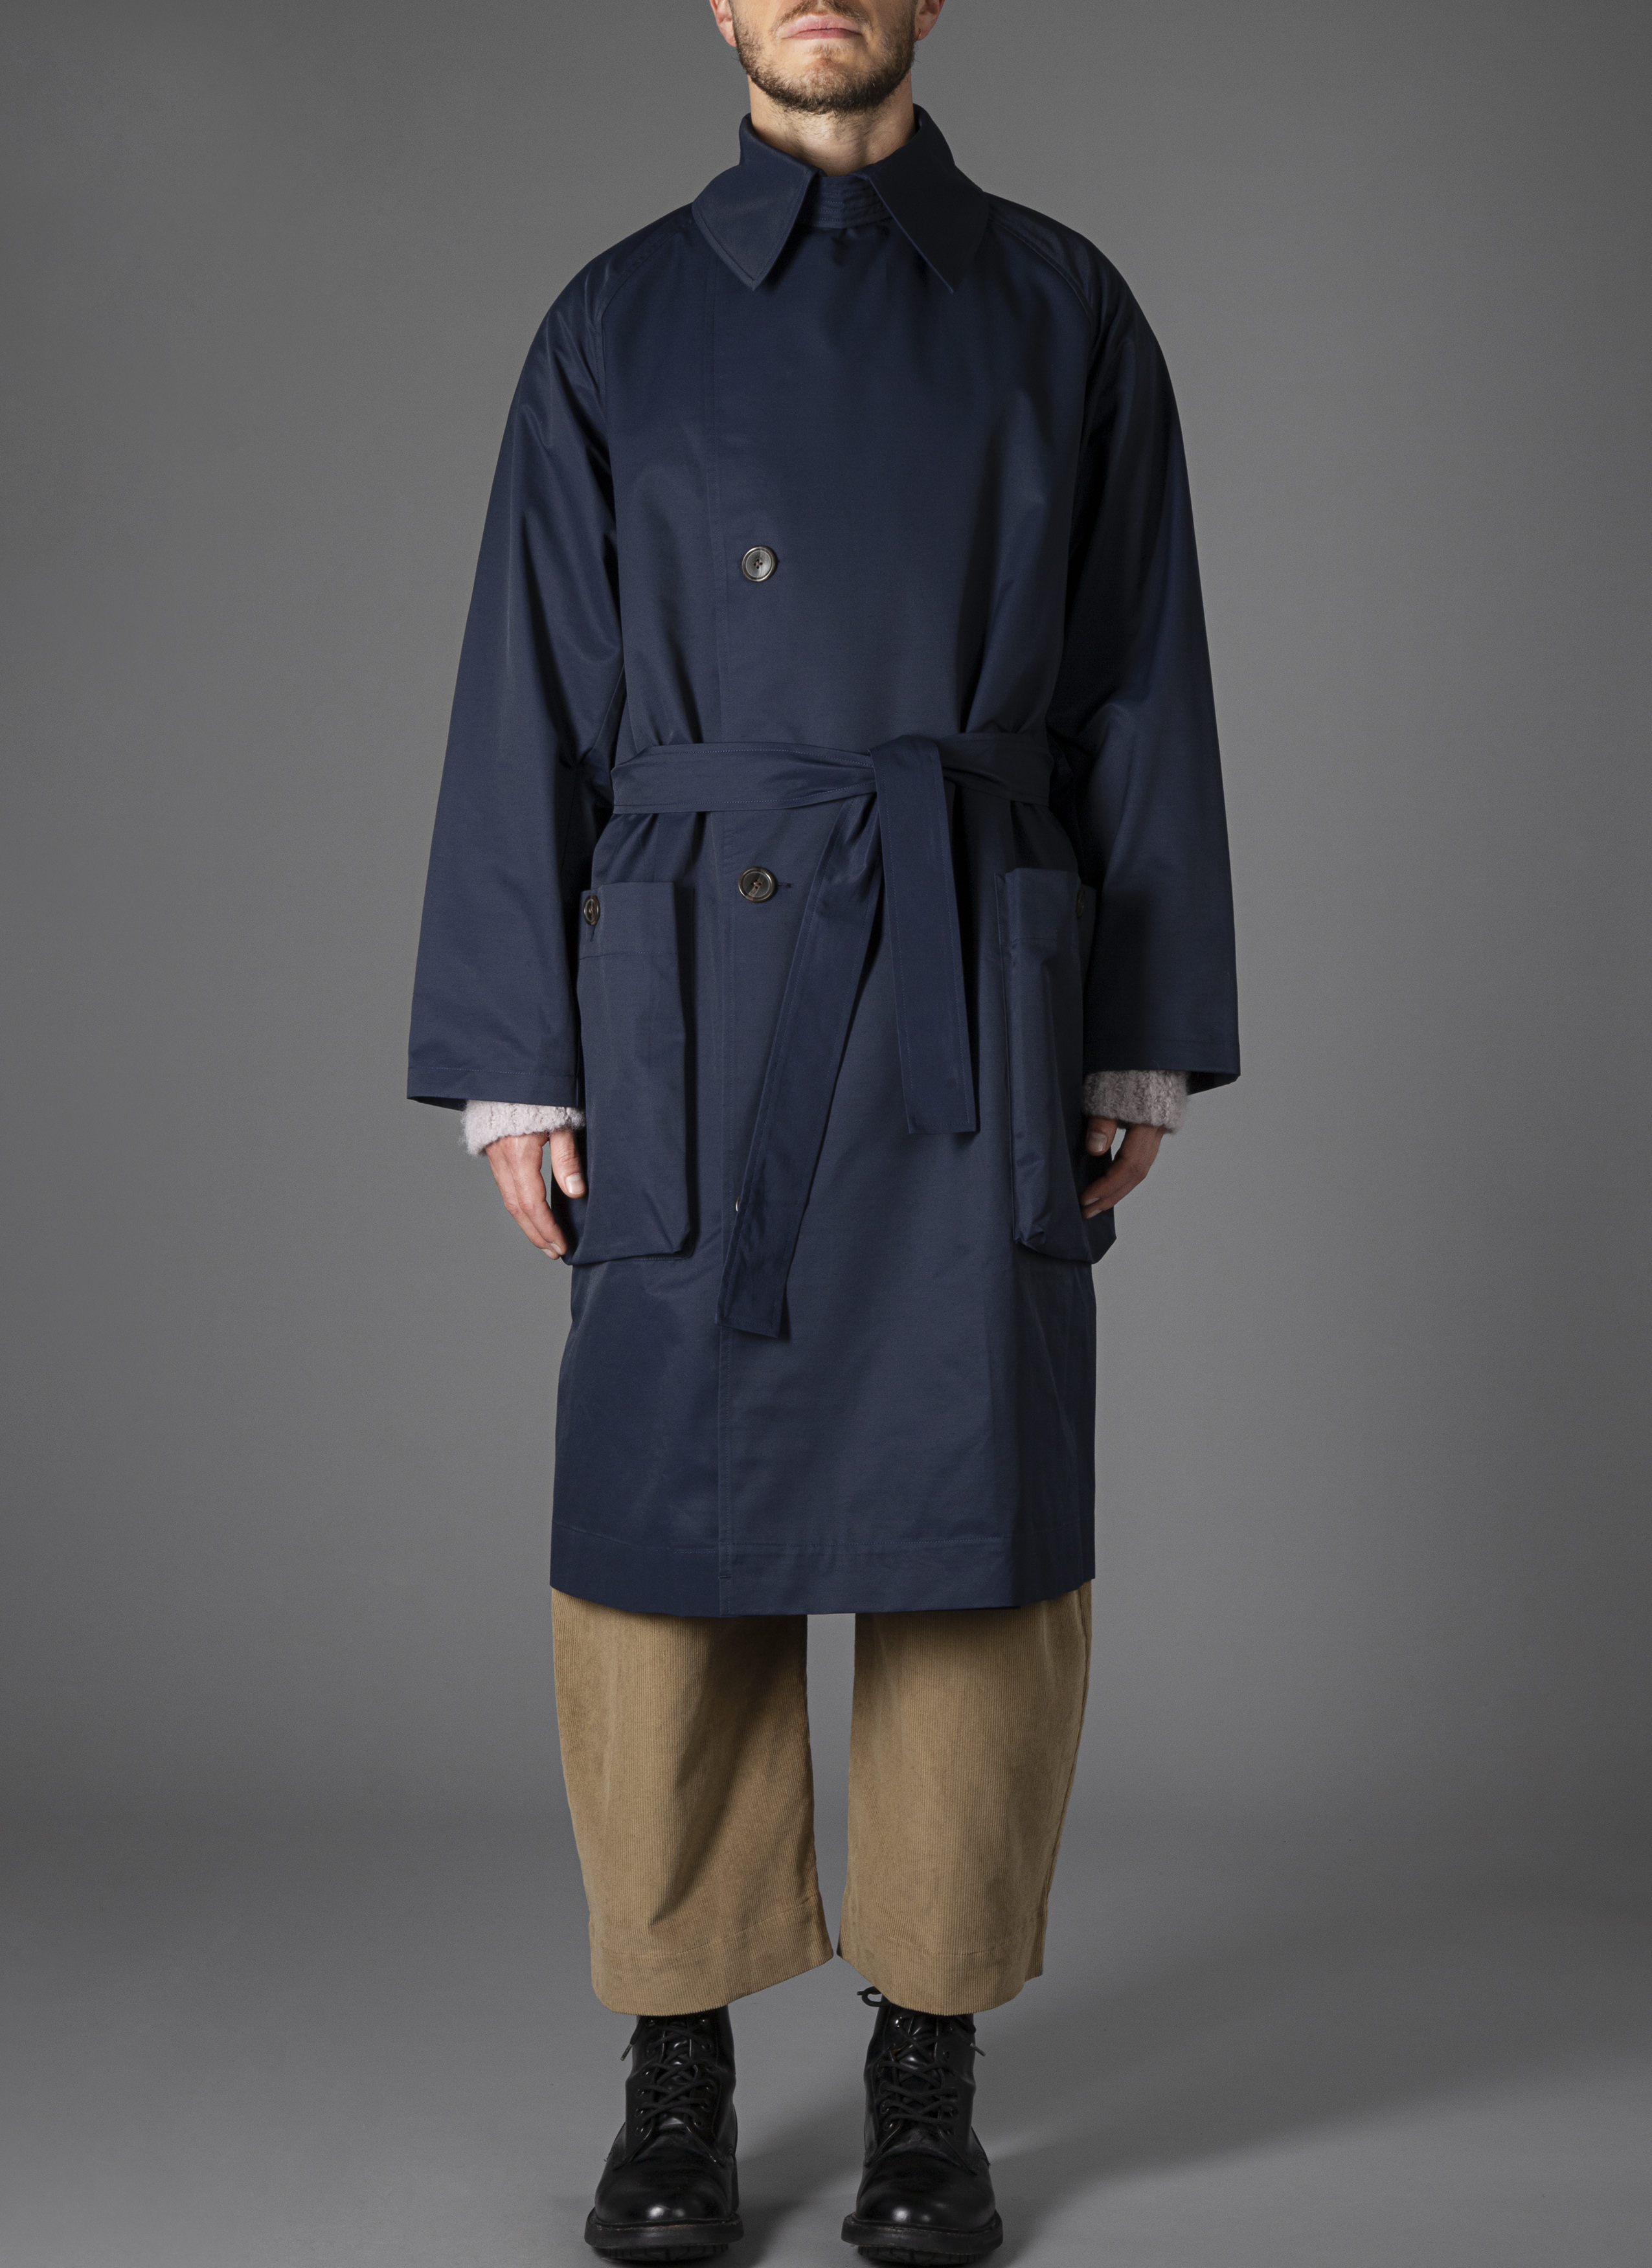 PEAKED LAPEL TRENCH COAT IN MIDNIGHT BLUE - GREI New York